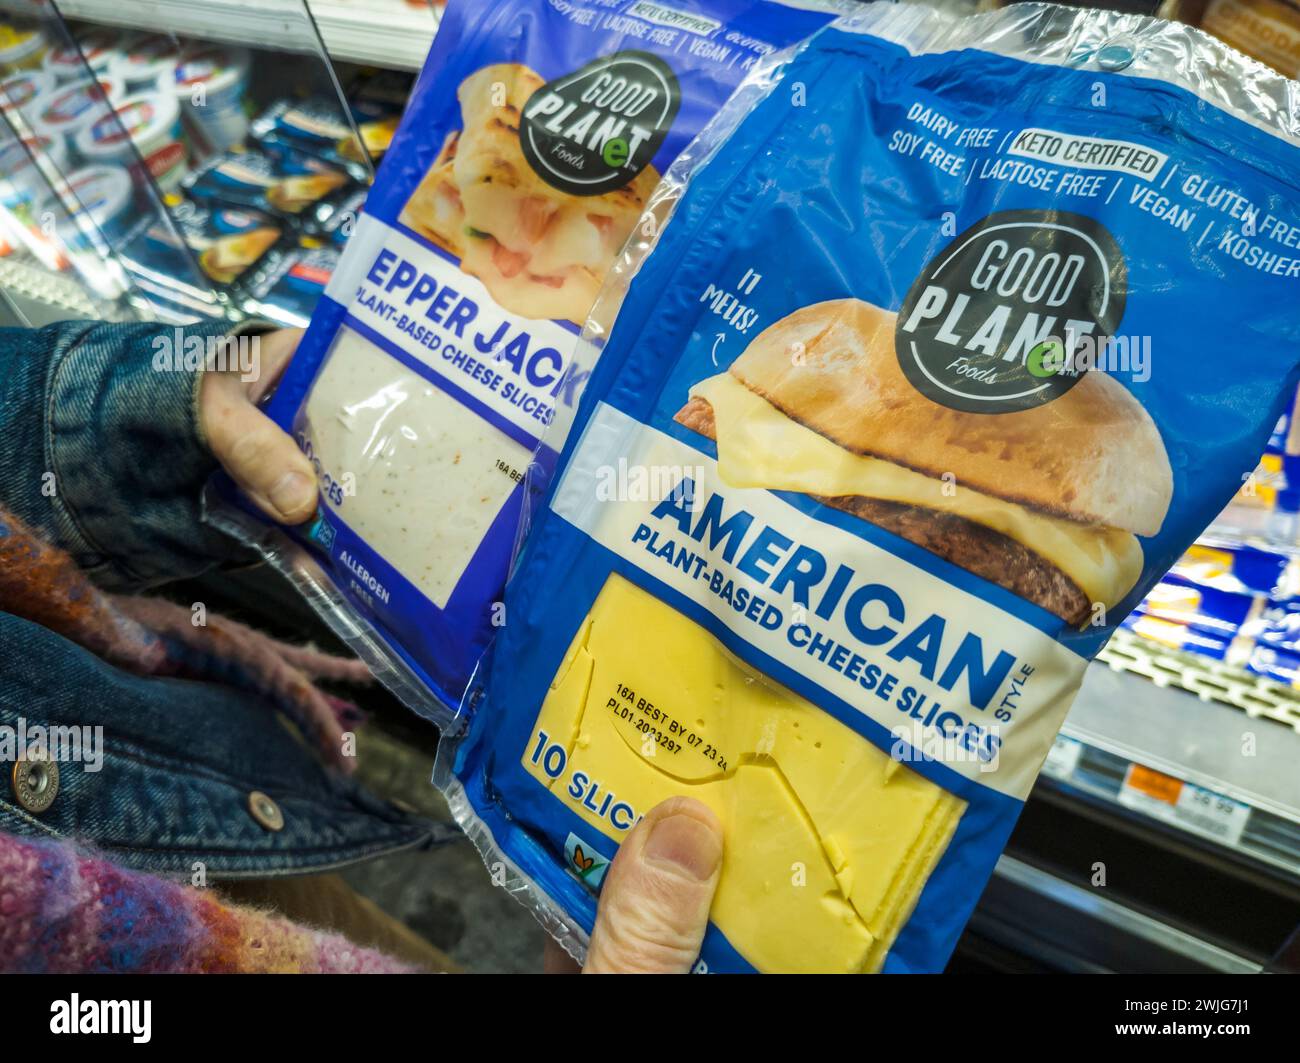 A shopper in a supermarket in New York chooses packages of Good Planet brand plant-based "cheese" in a supermarket in New York on Friday, February 9, 2024. (© Richard B. Levine) Stock Photo